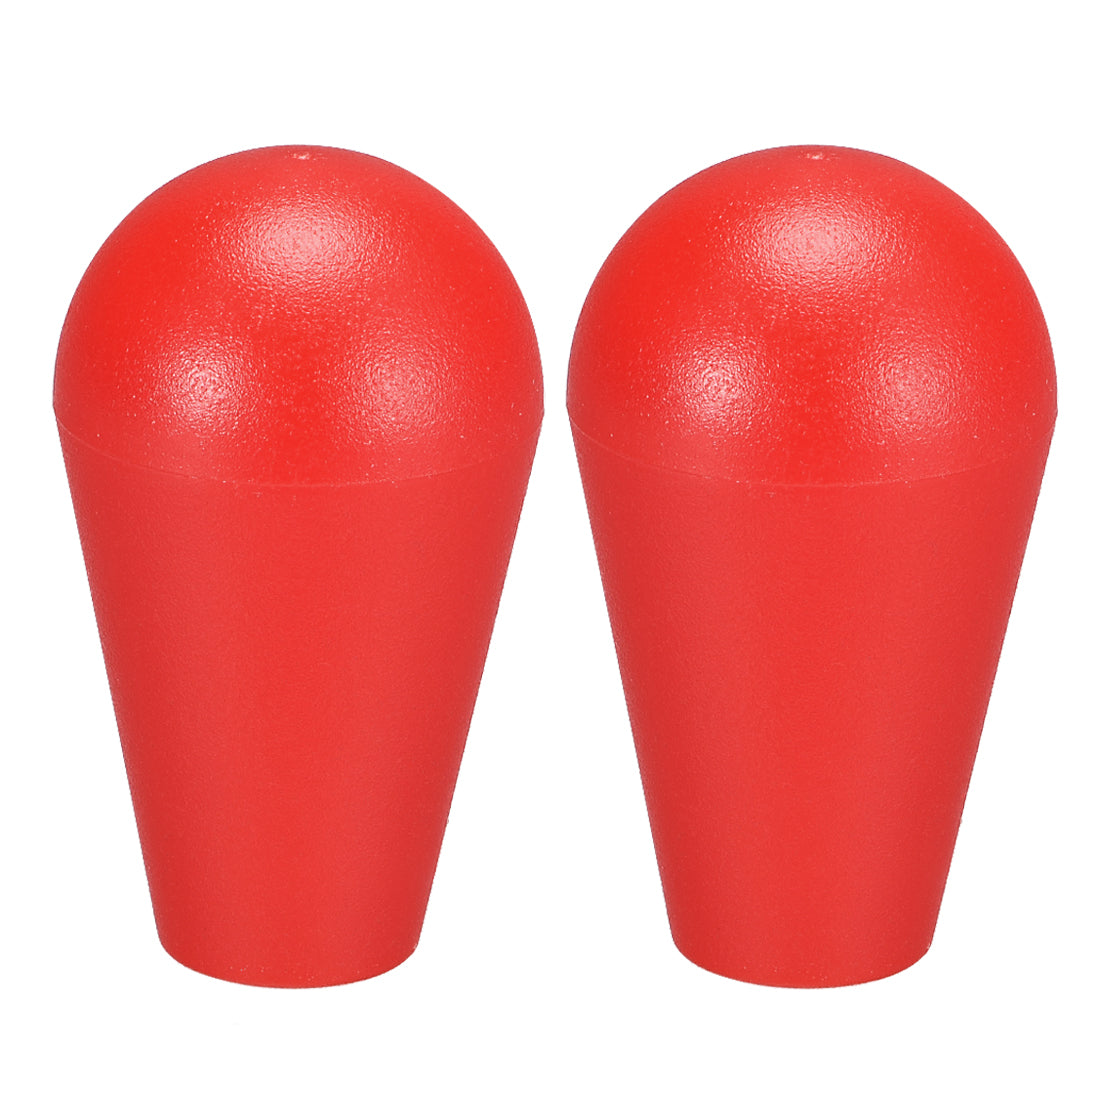 uxcell Uxcell Ellipse Oval Joystick Head Rocker Ball Top Handle American Type Arcade Game DIY Parts Replacement Red 2Pcs